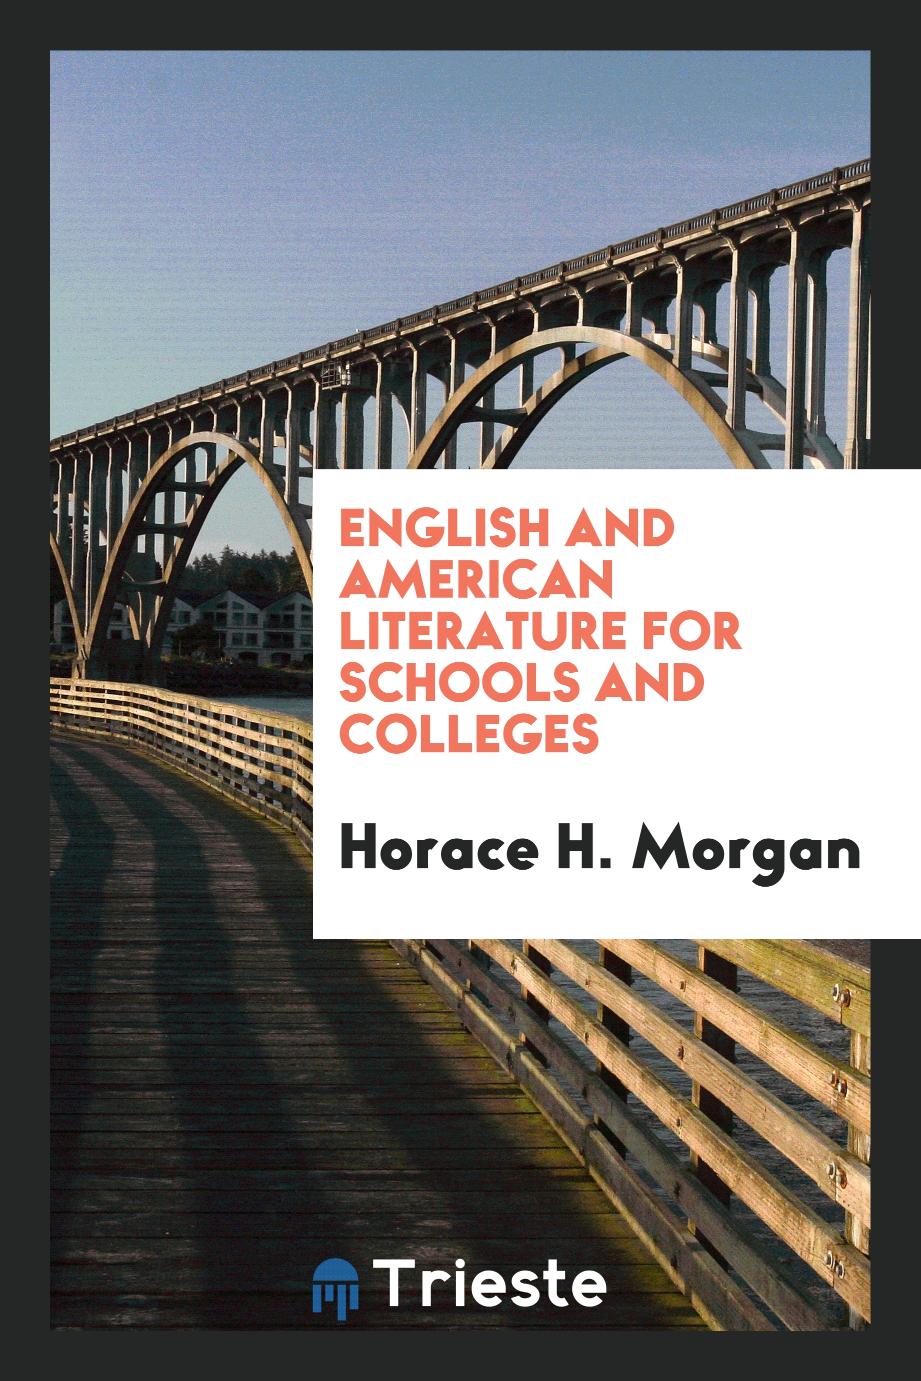 English and American Literature for Schools and Colleges